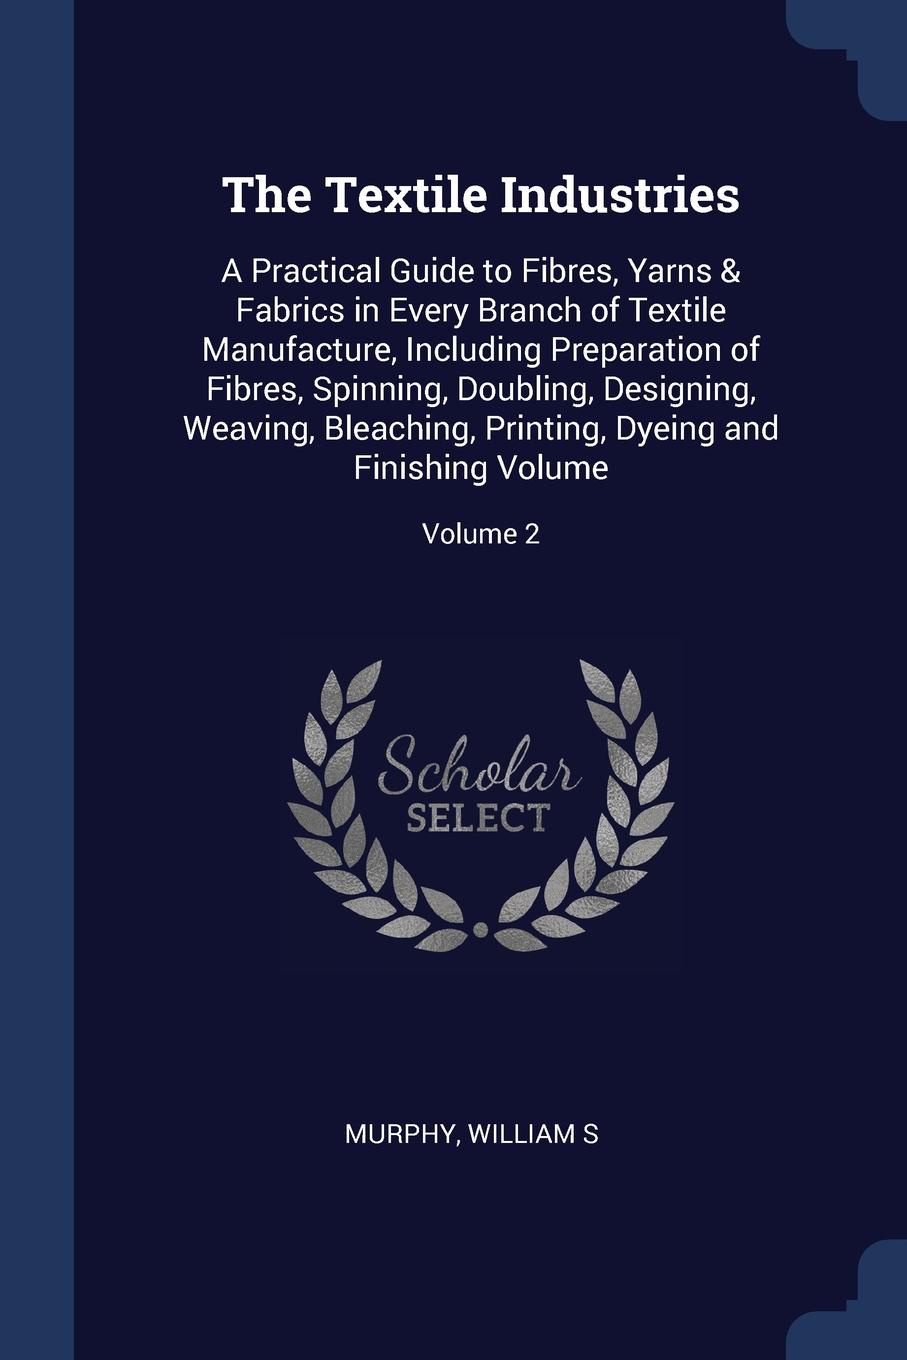 The Textile Industries. A Practical Guide to Fibres, Yarns . Fabrics in Every Branch of Textile Manufacture, Including Preparation of Fibres, Spinning, Doubling, Designing, Weaving, Bleaching, Printing, Dyeing and Finishing Volume; Volume 2